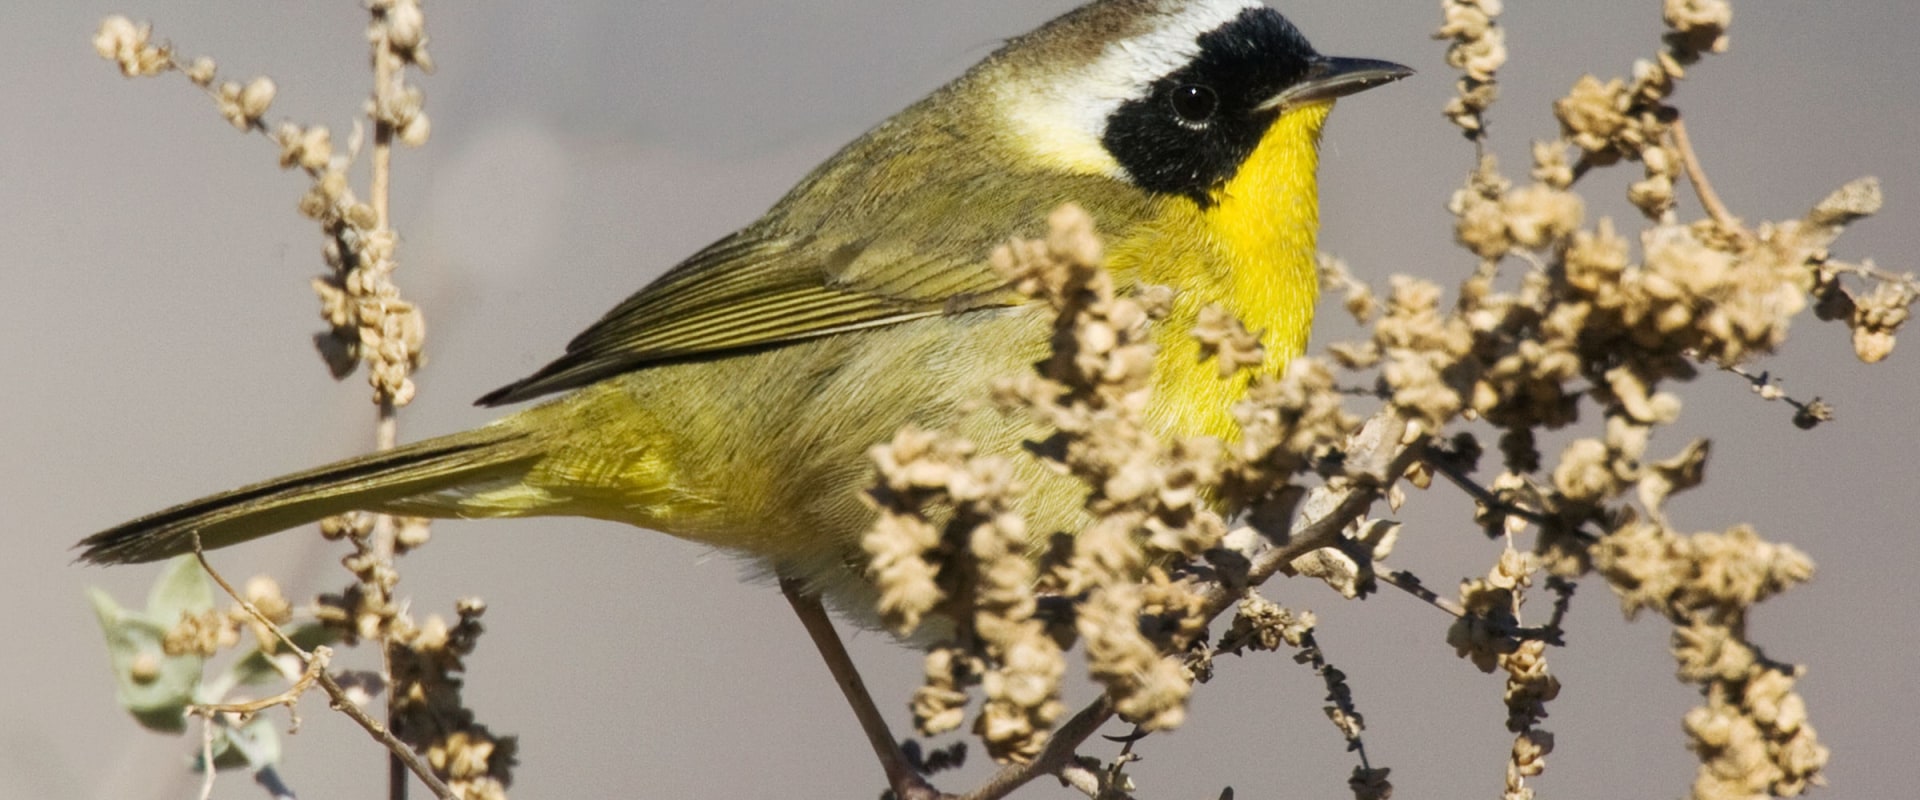 How has citizen science been used to help protect birds and their habitats through initiatives by or in partnership with the audubon society?